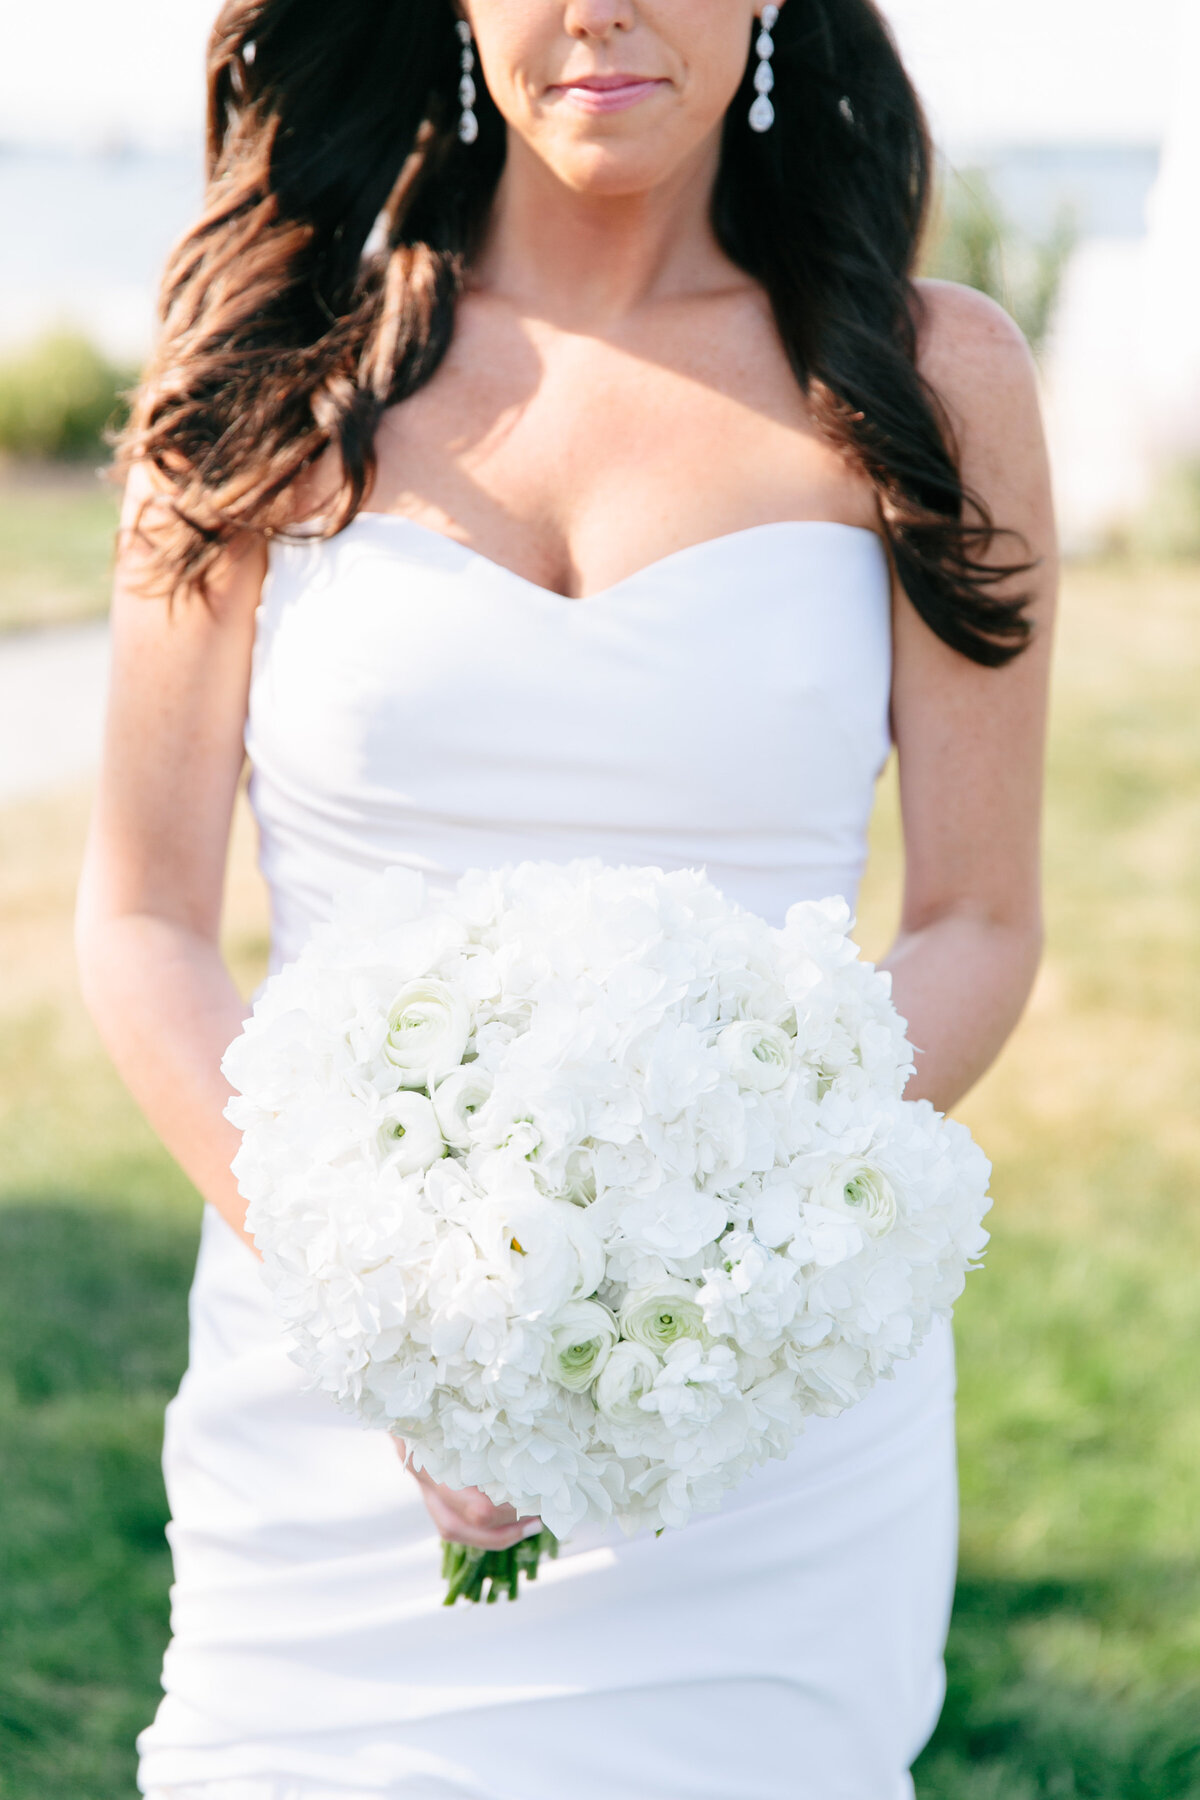 Beautiful bride holding a bouquet standing on a field in front of a lighthouse in Newport Rhode Island